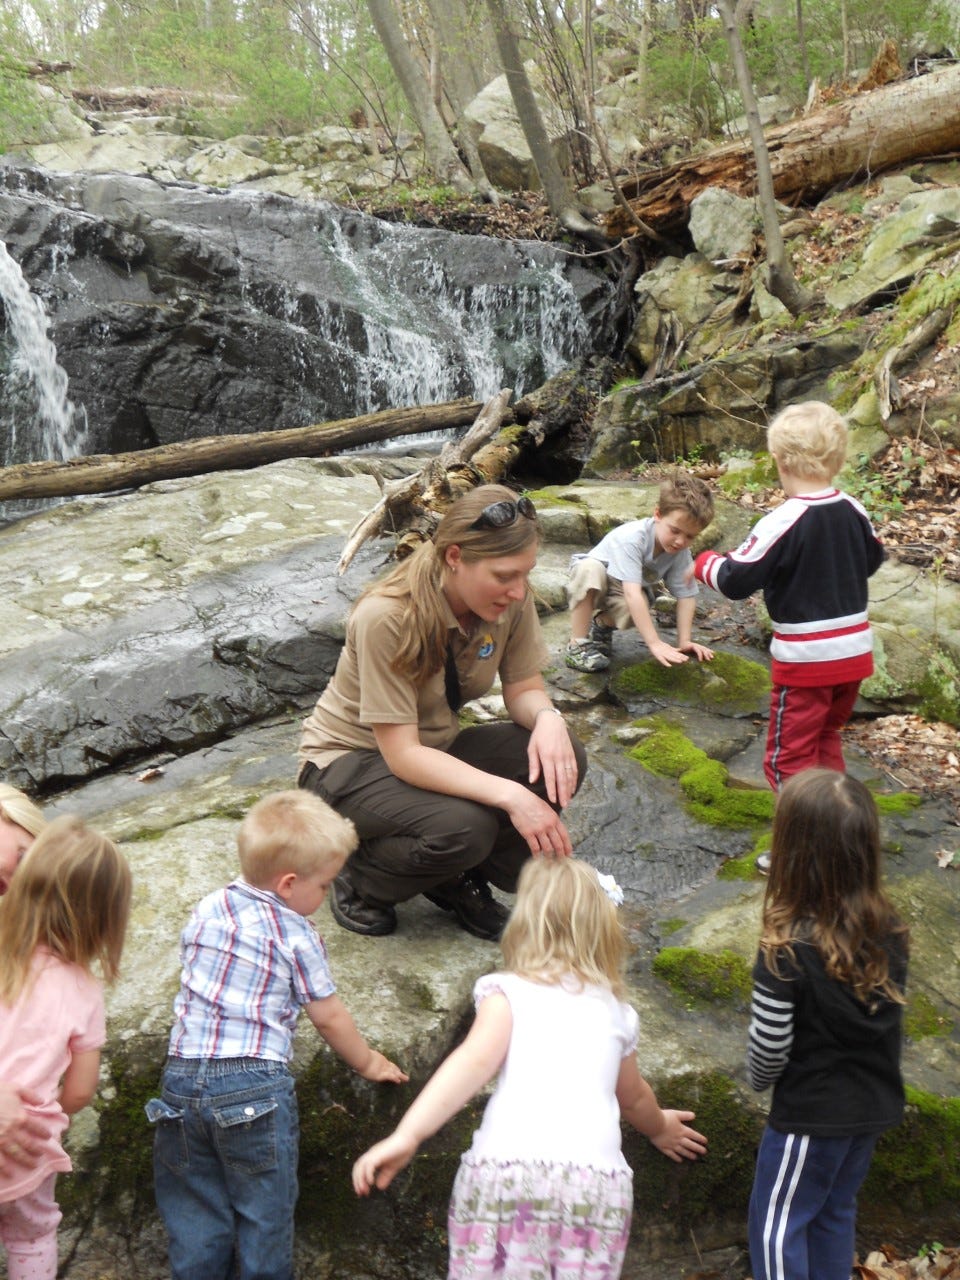 Woman in Service uniform kneels on a rock with a group of young children